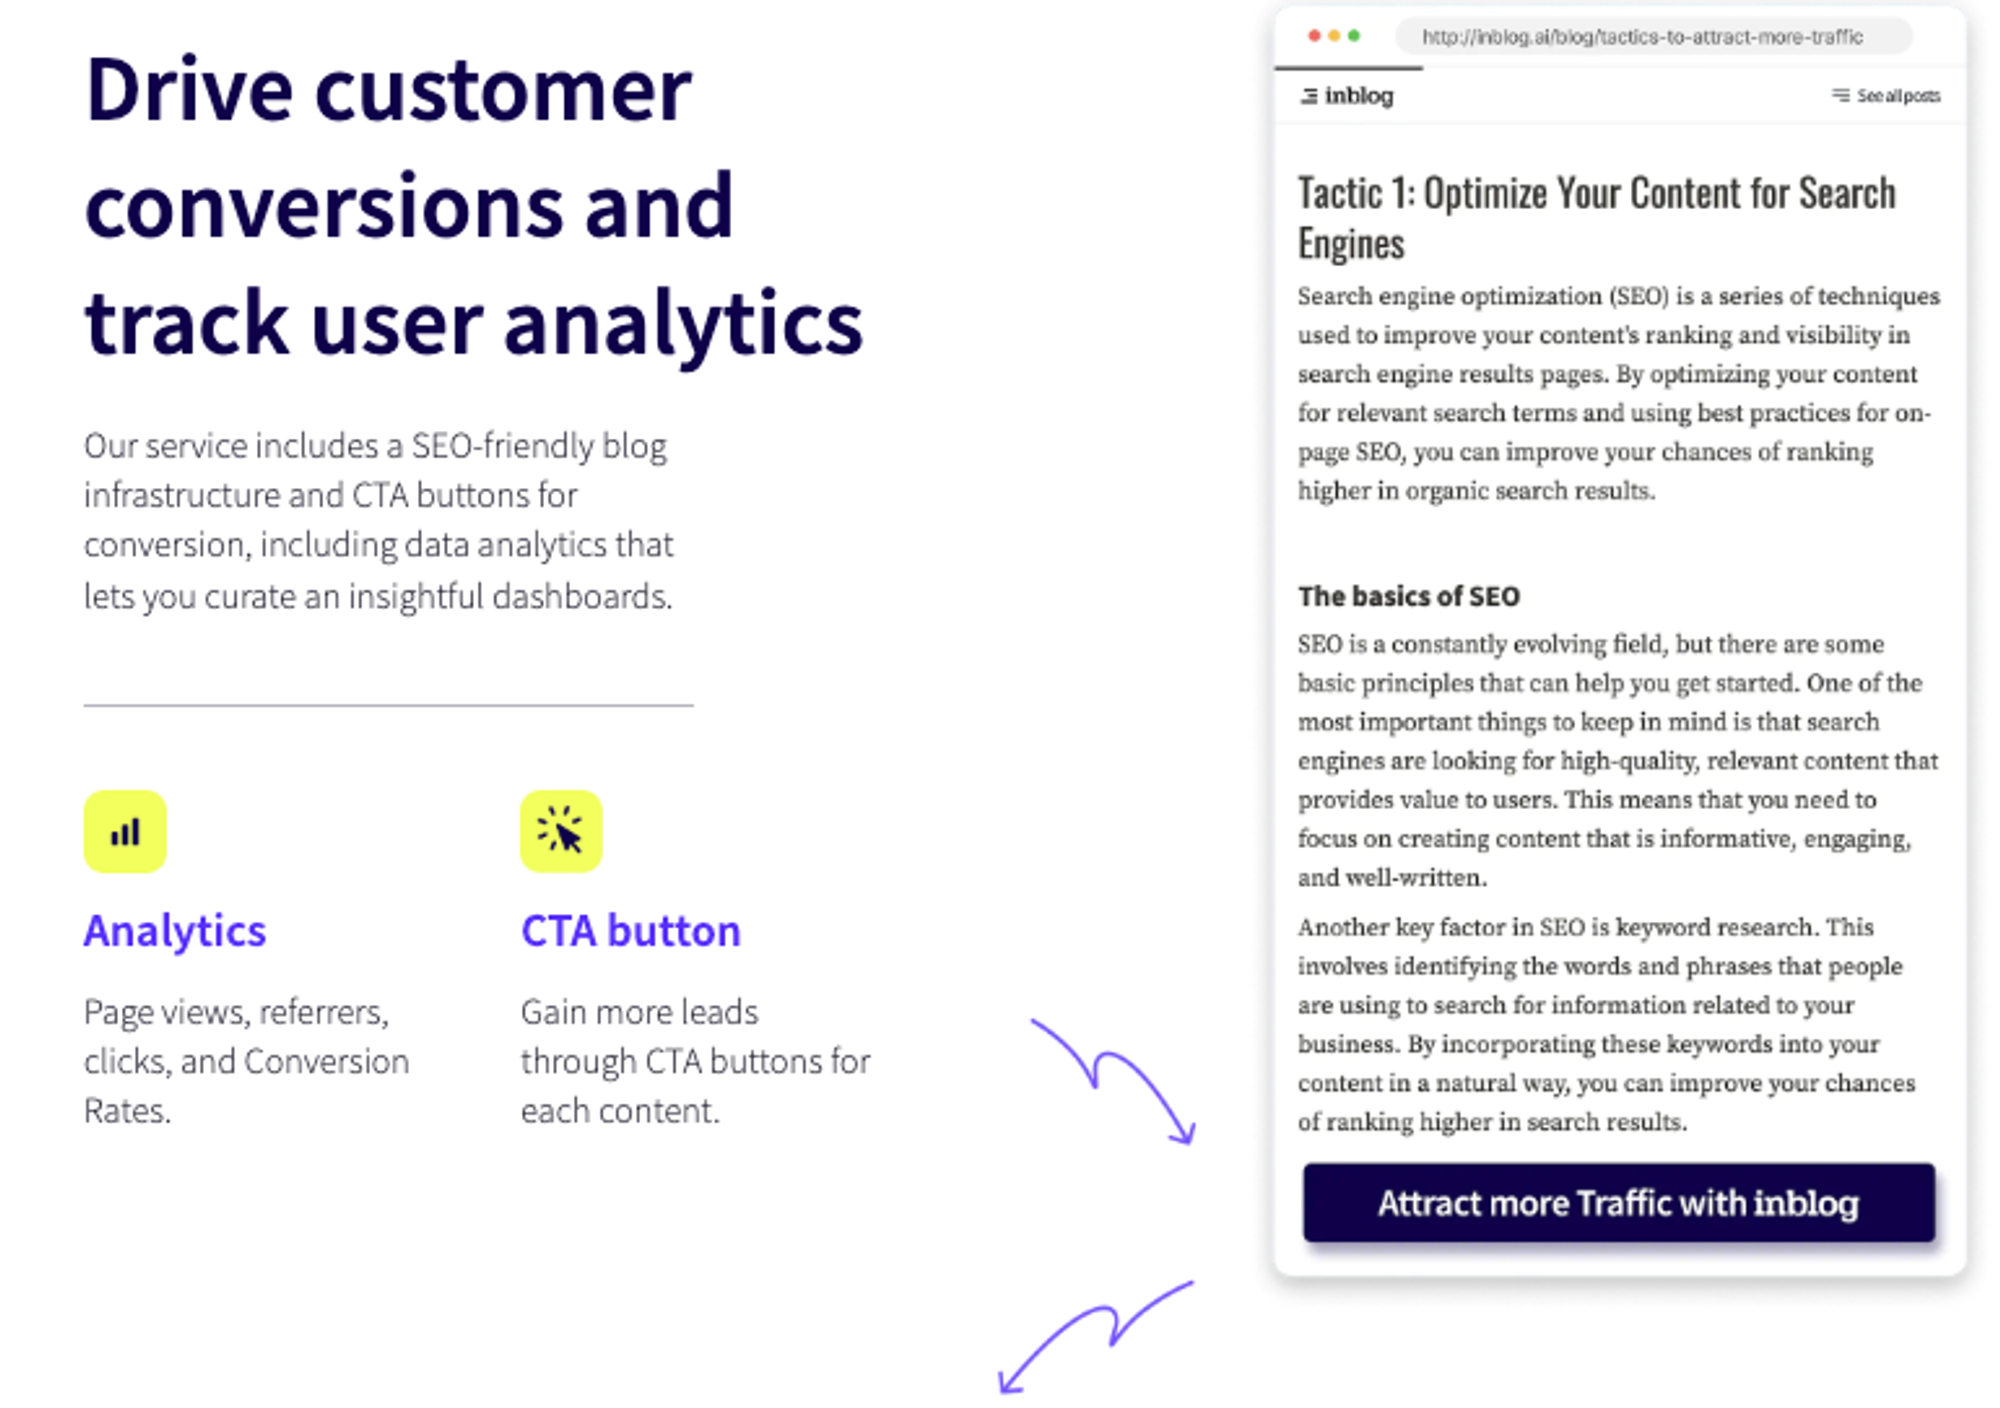 inblog: drive customer conversions and track user analytics